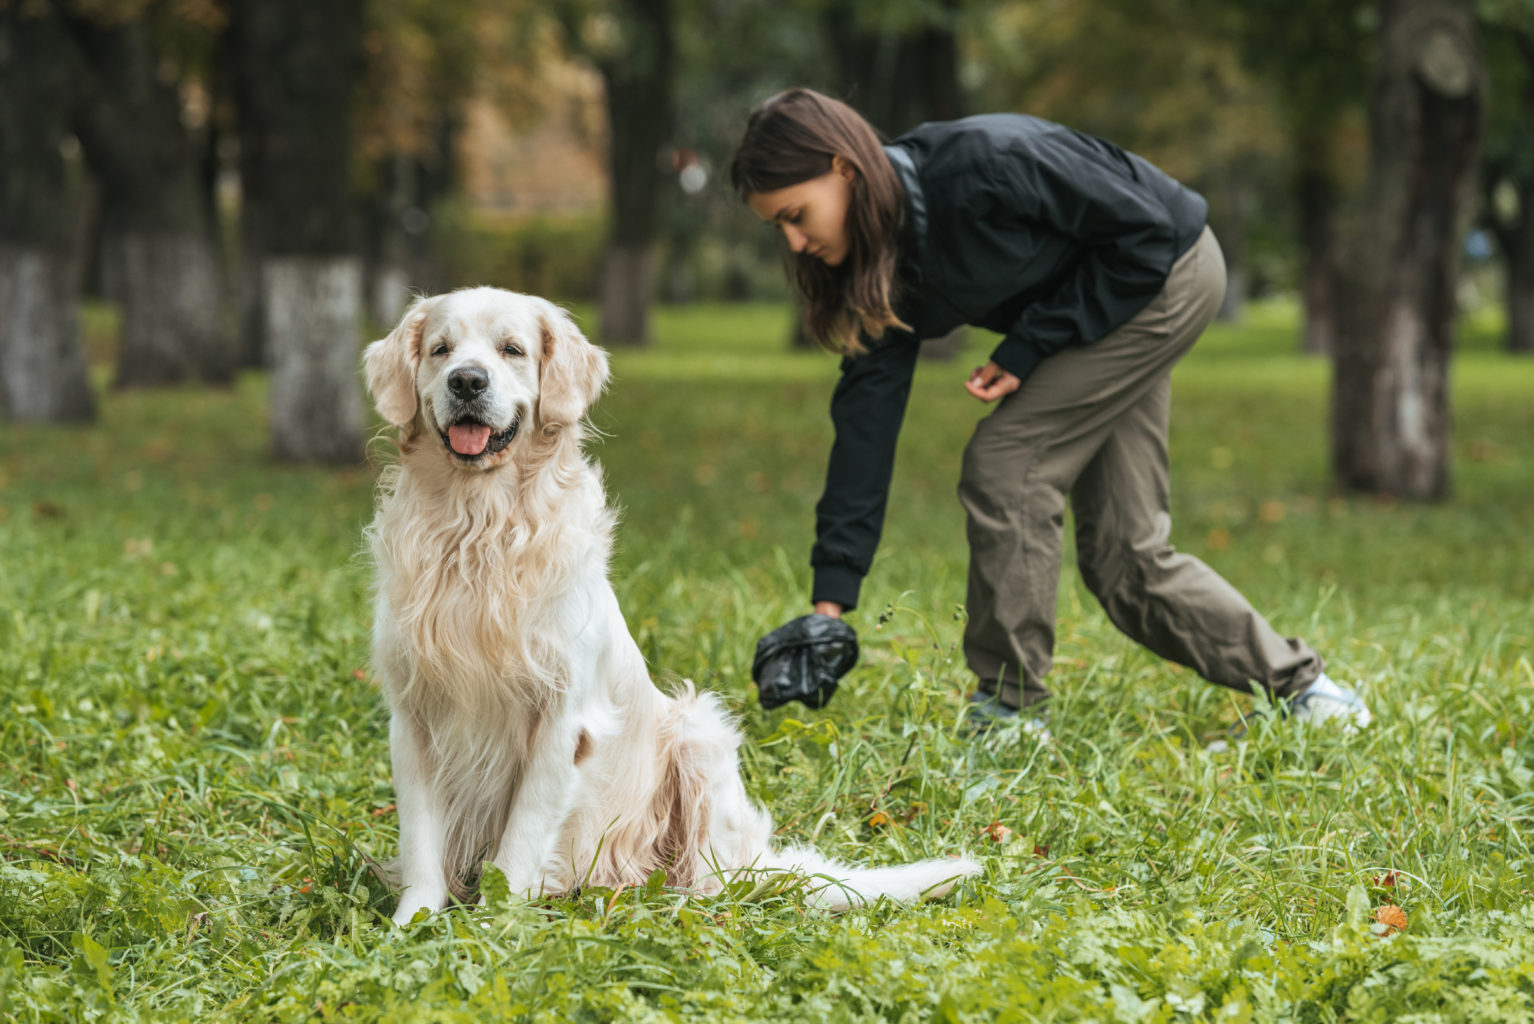 Young woman cleaning up after a Golden Retriever dog in a park.